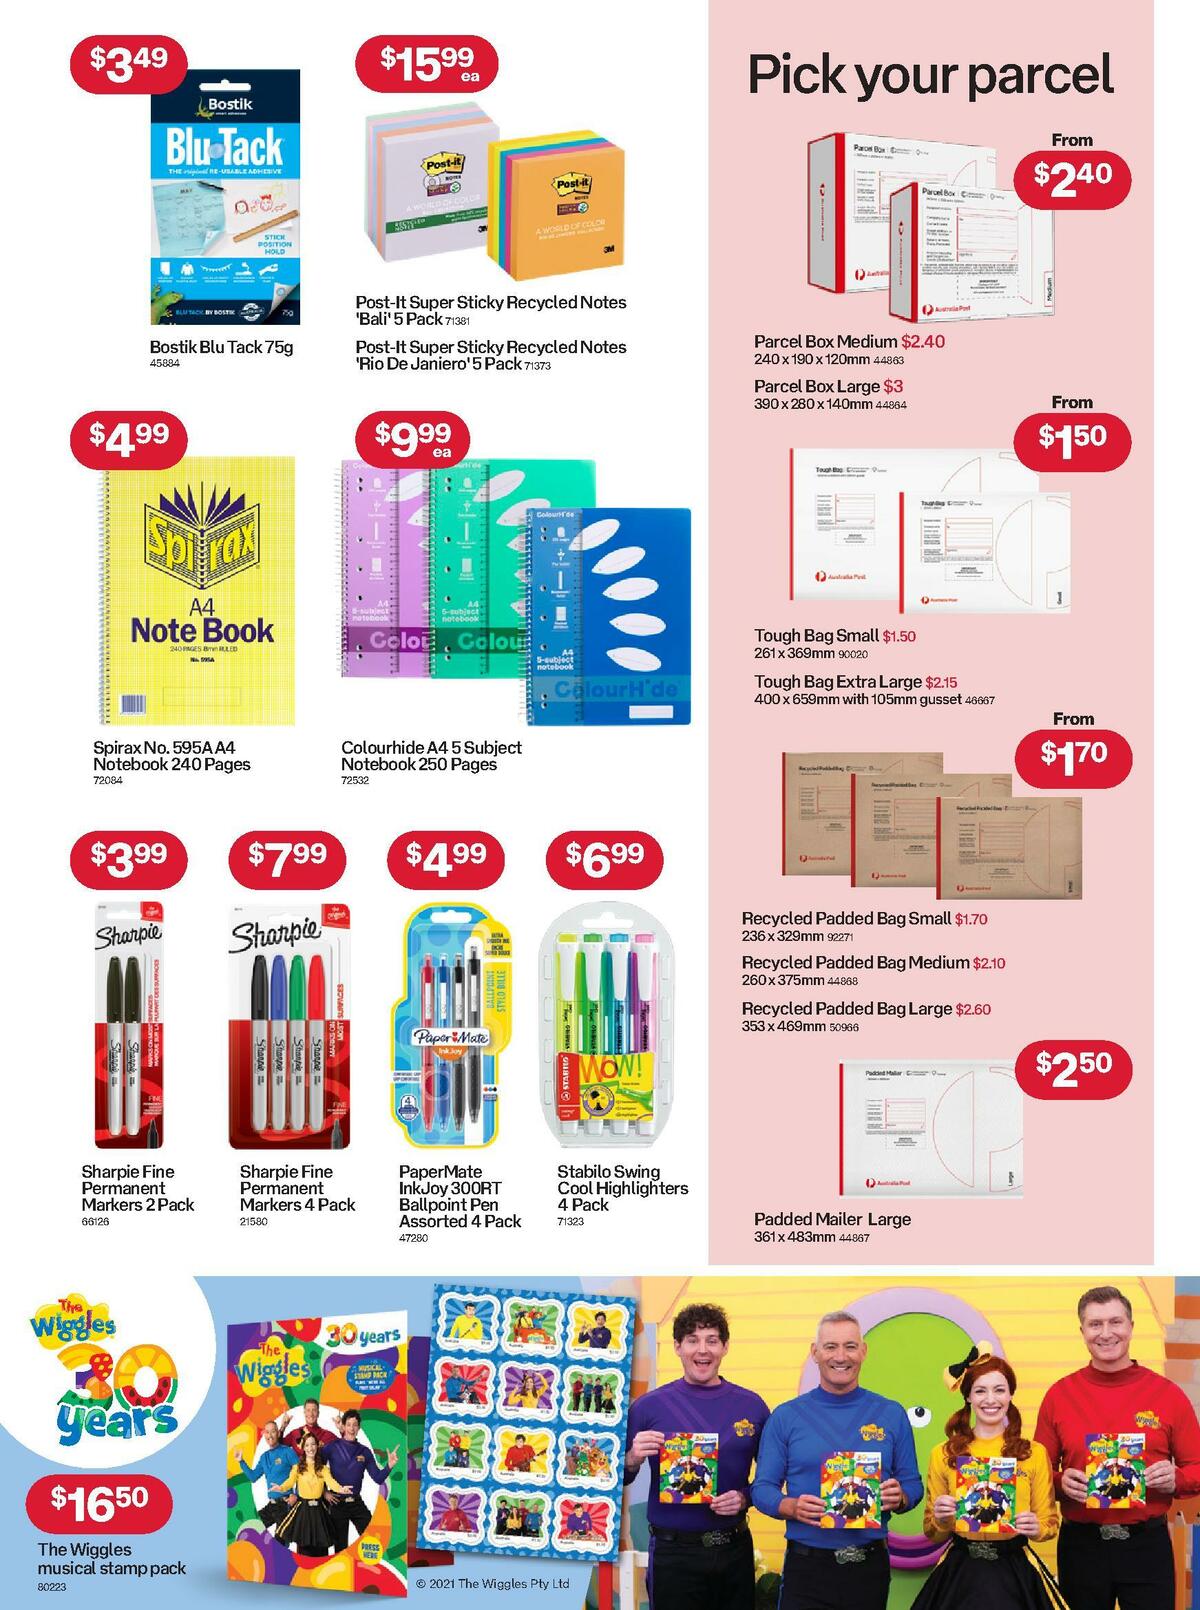 Australia Post Australia - Catalogues & Specials for 10 May - Page 3